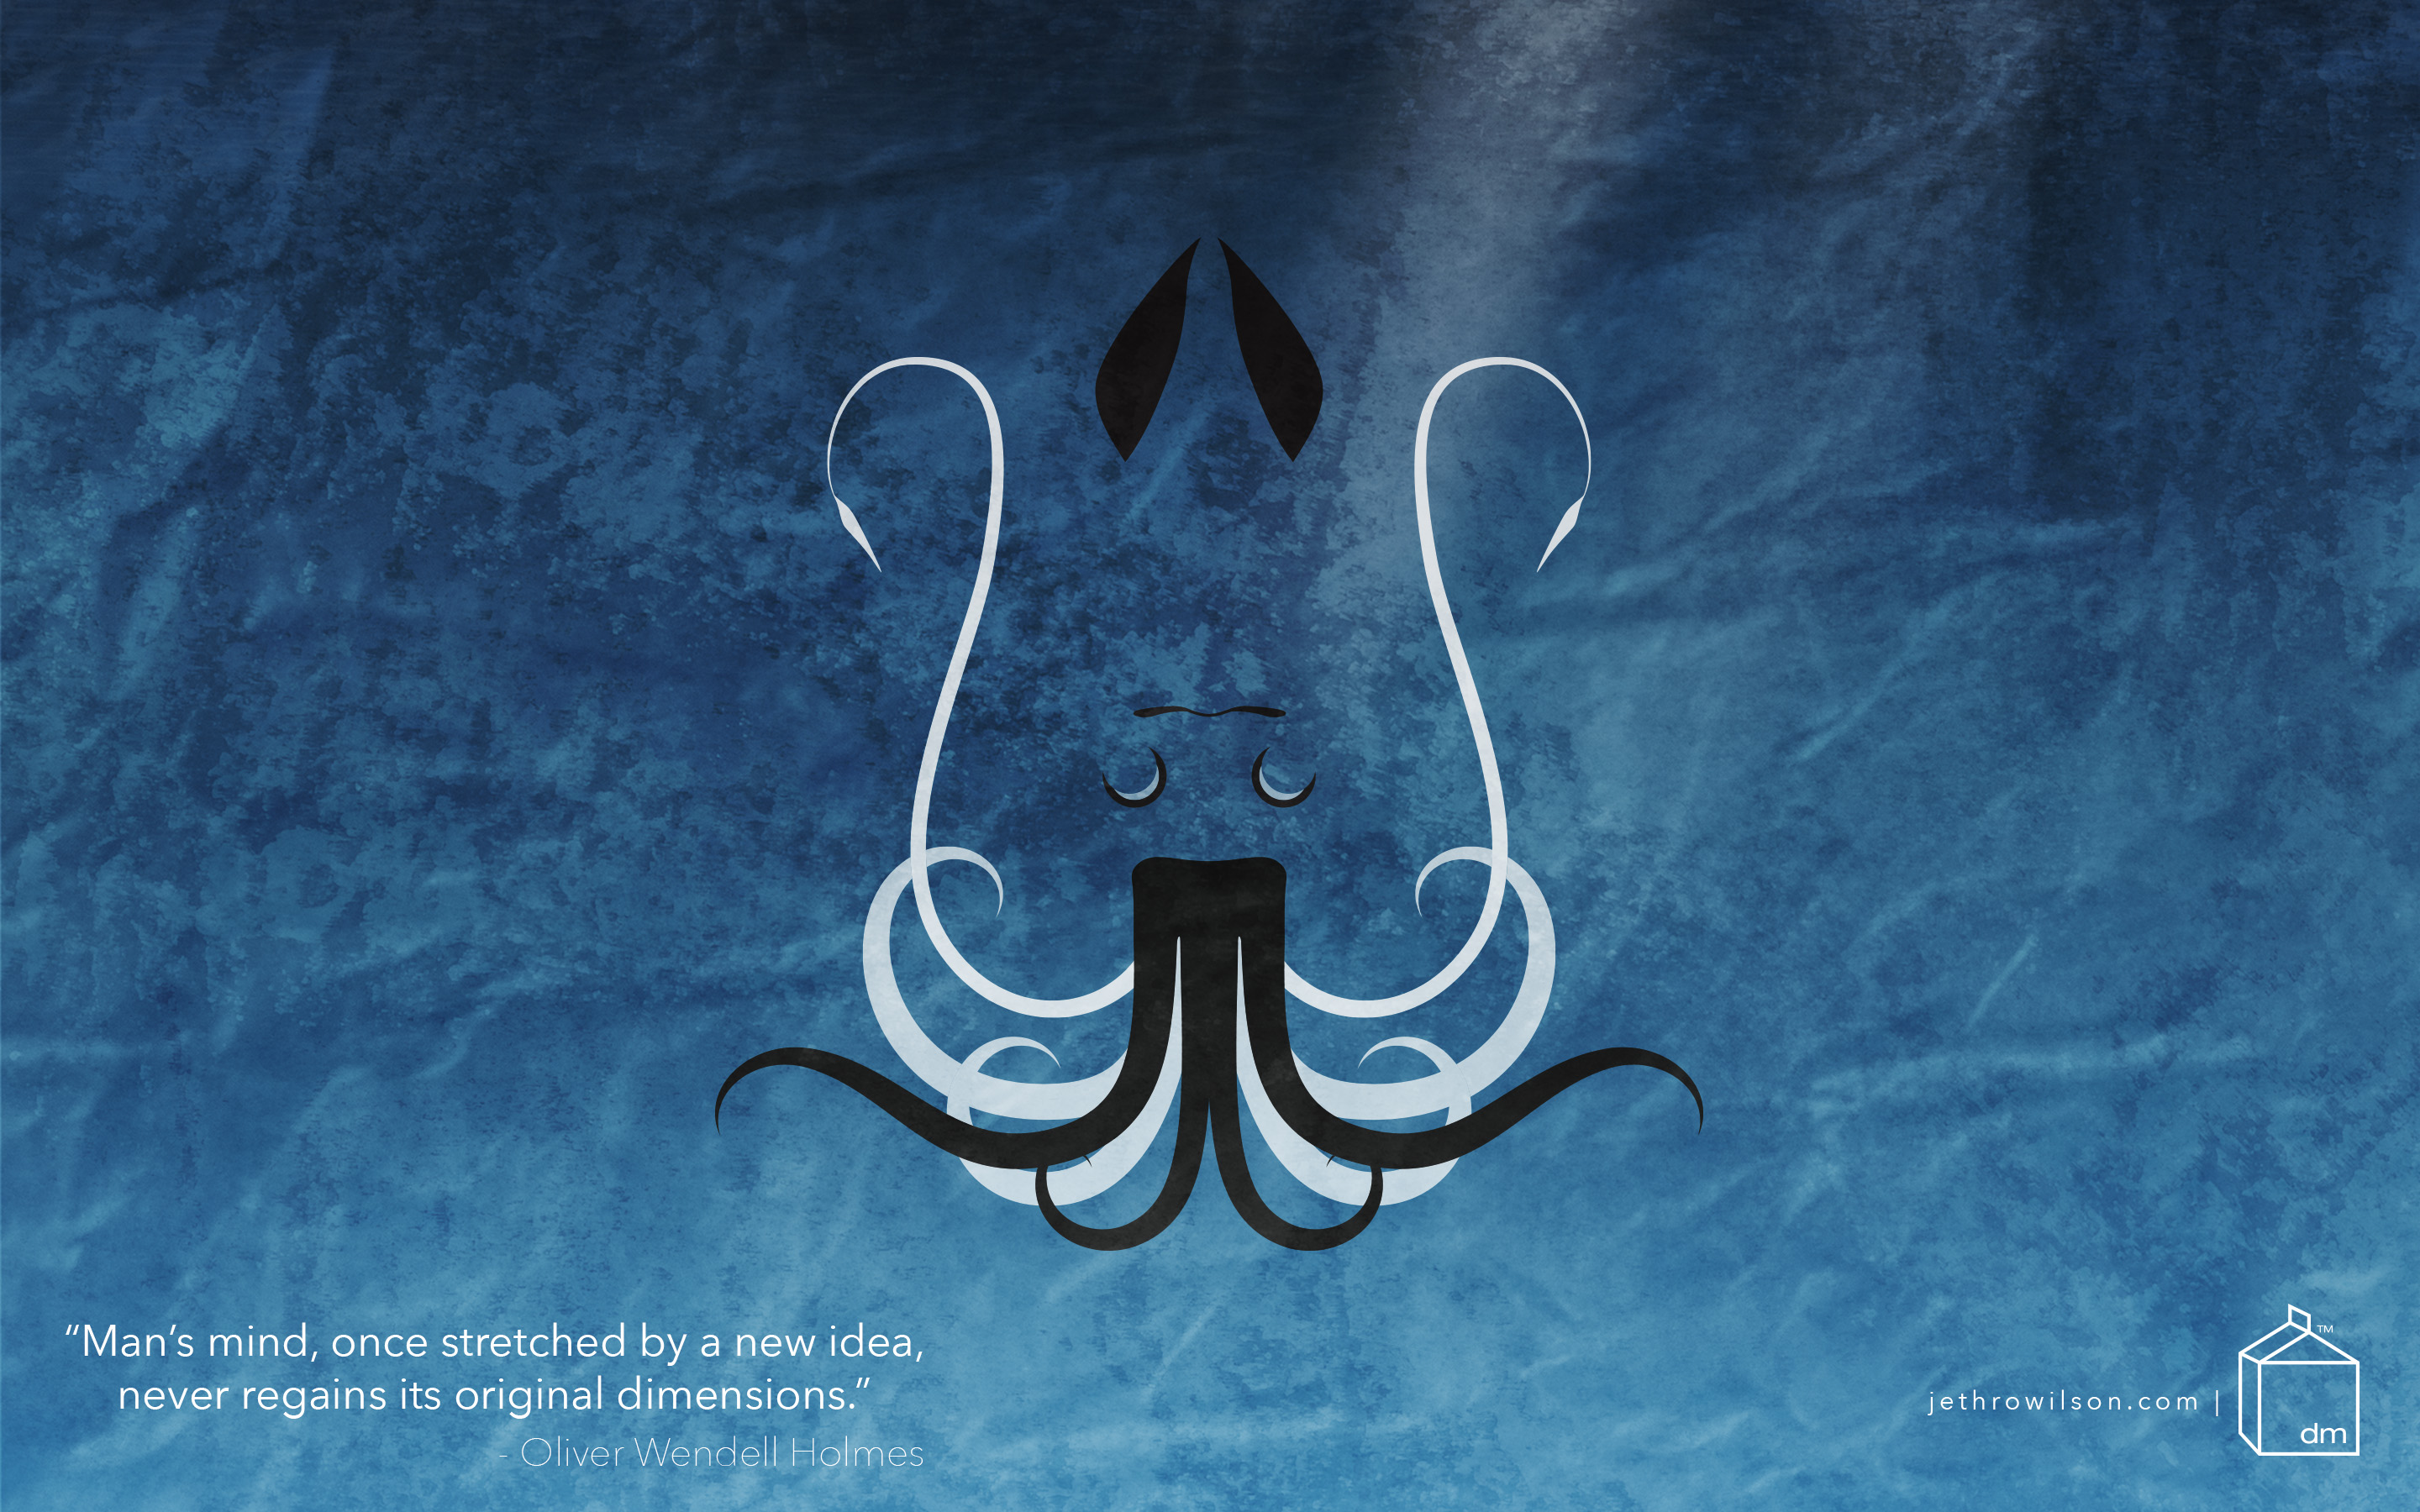 Giant Squid Wallpapers